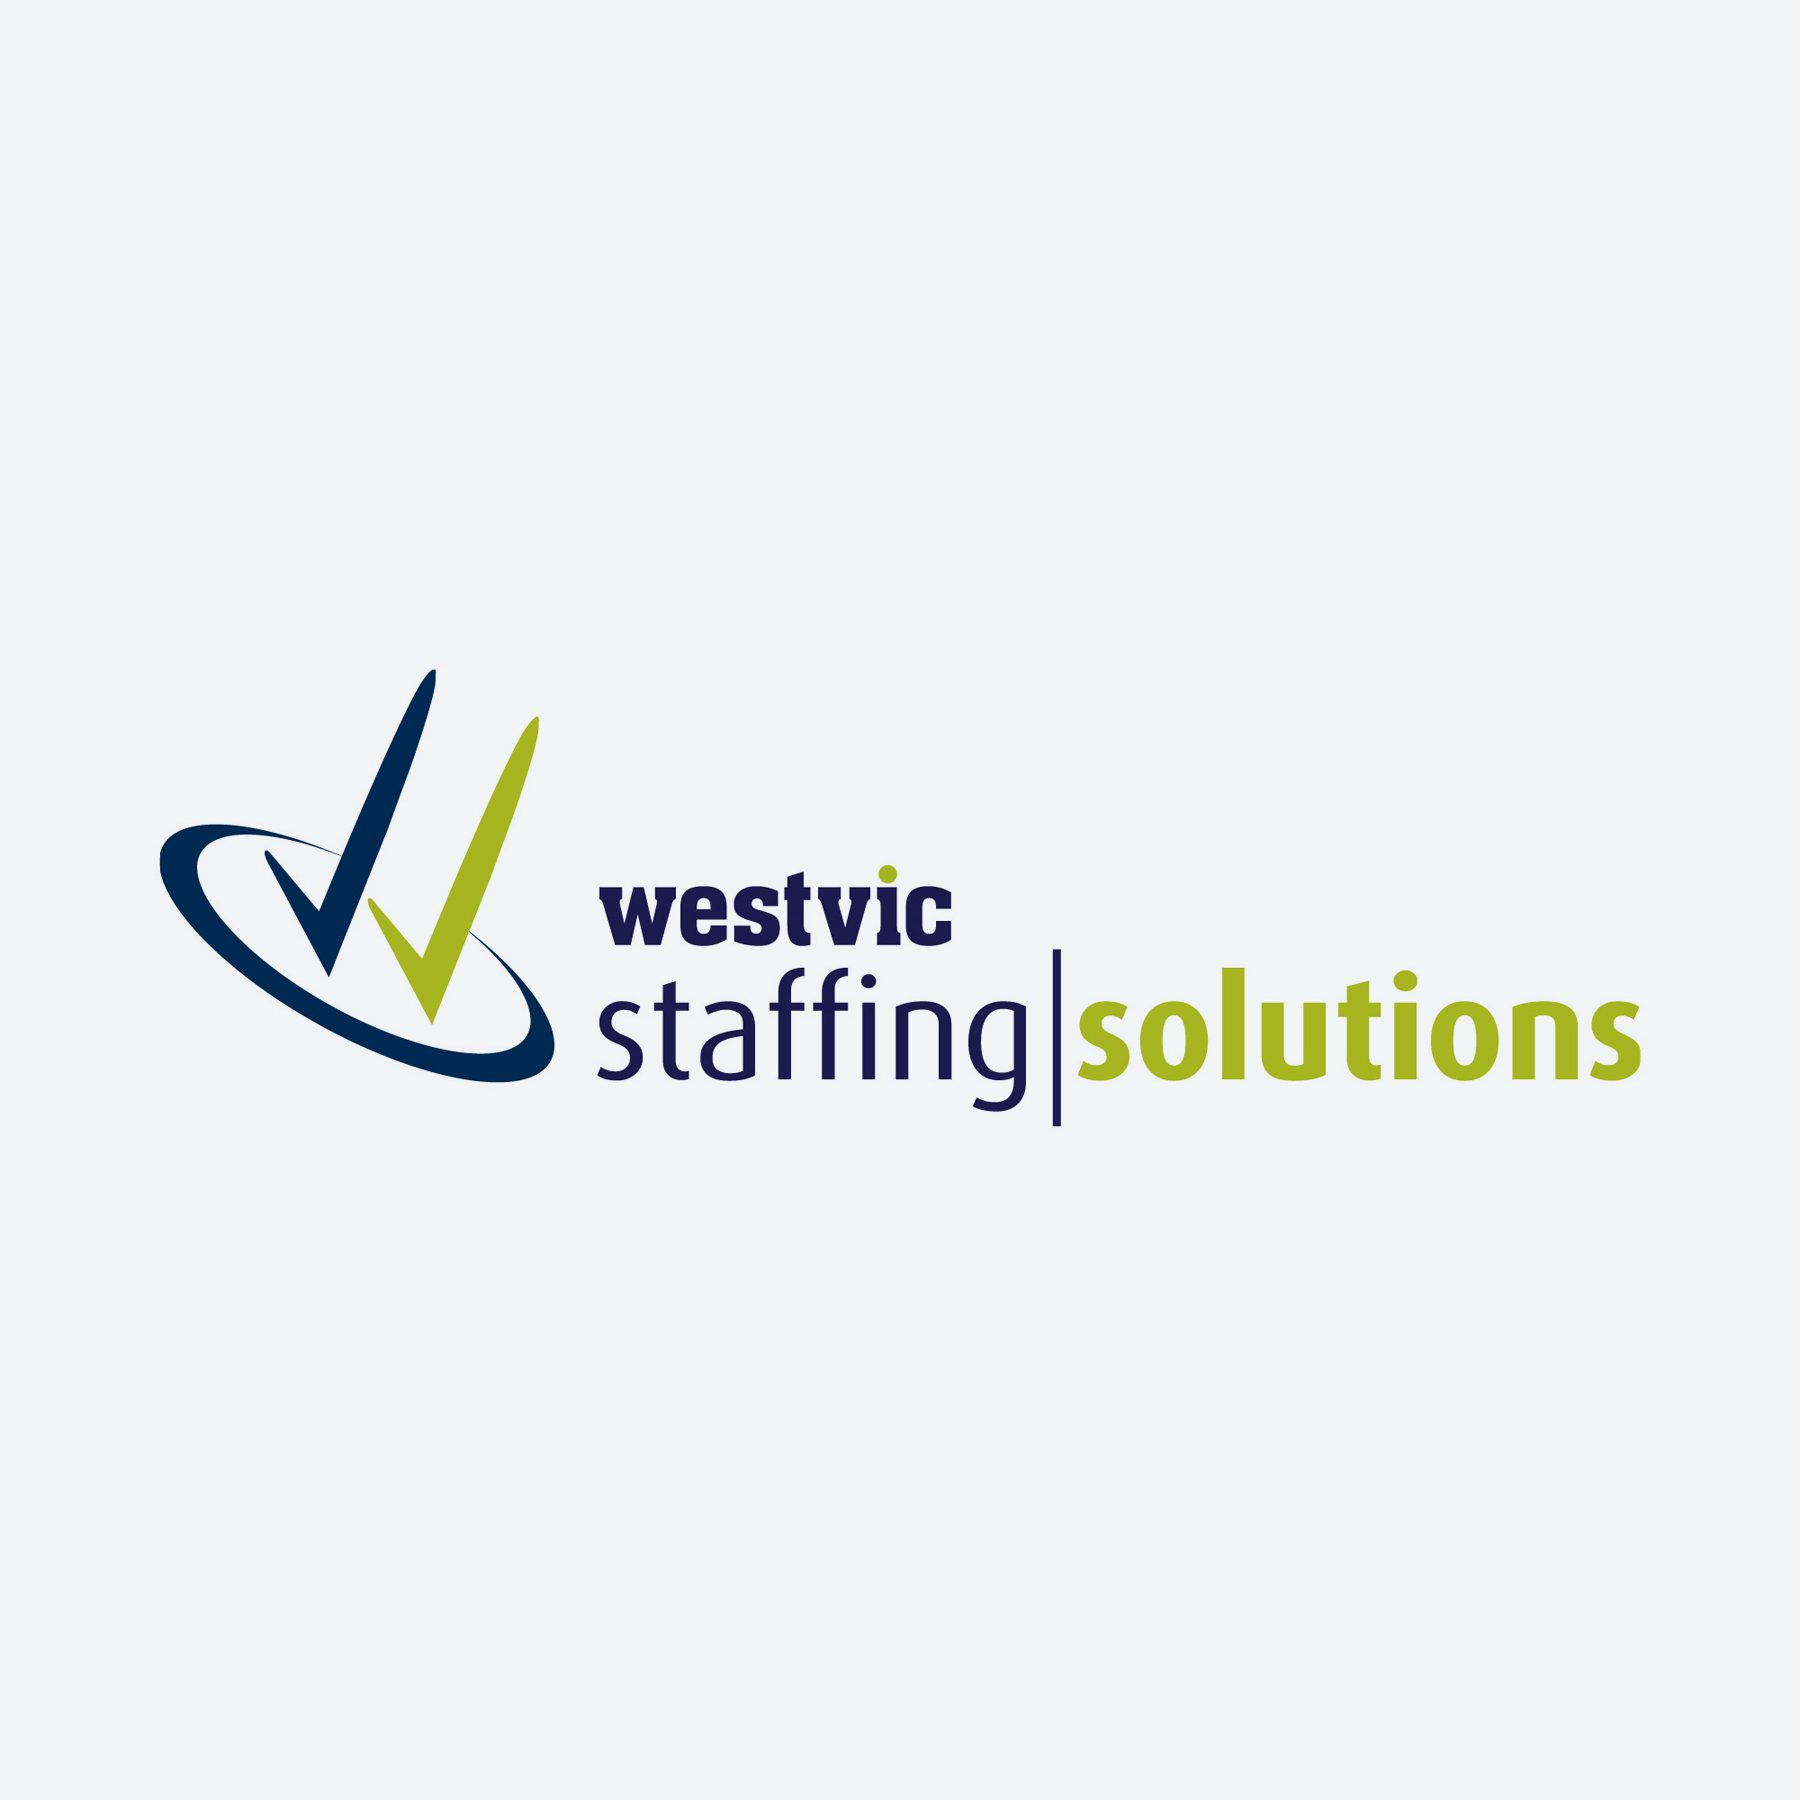 Westvic Staffing Solutions